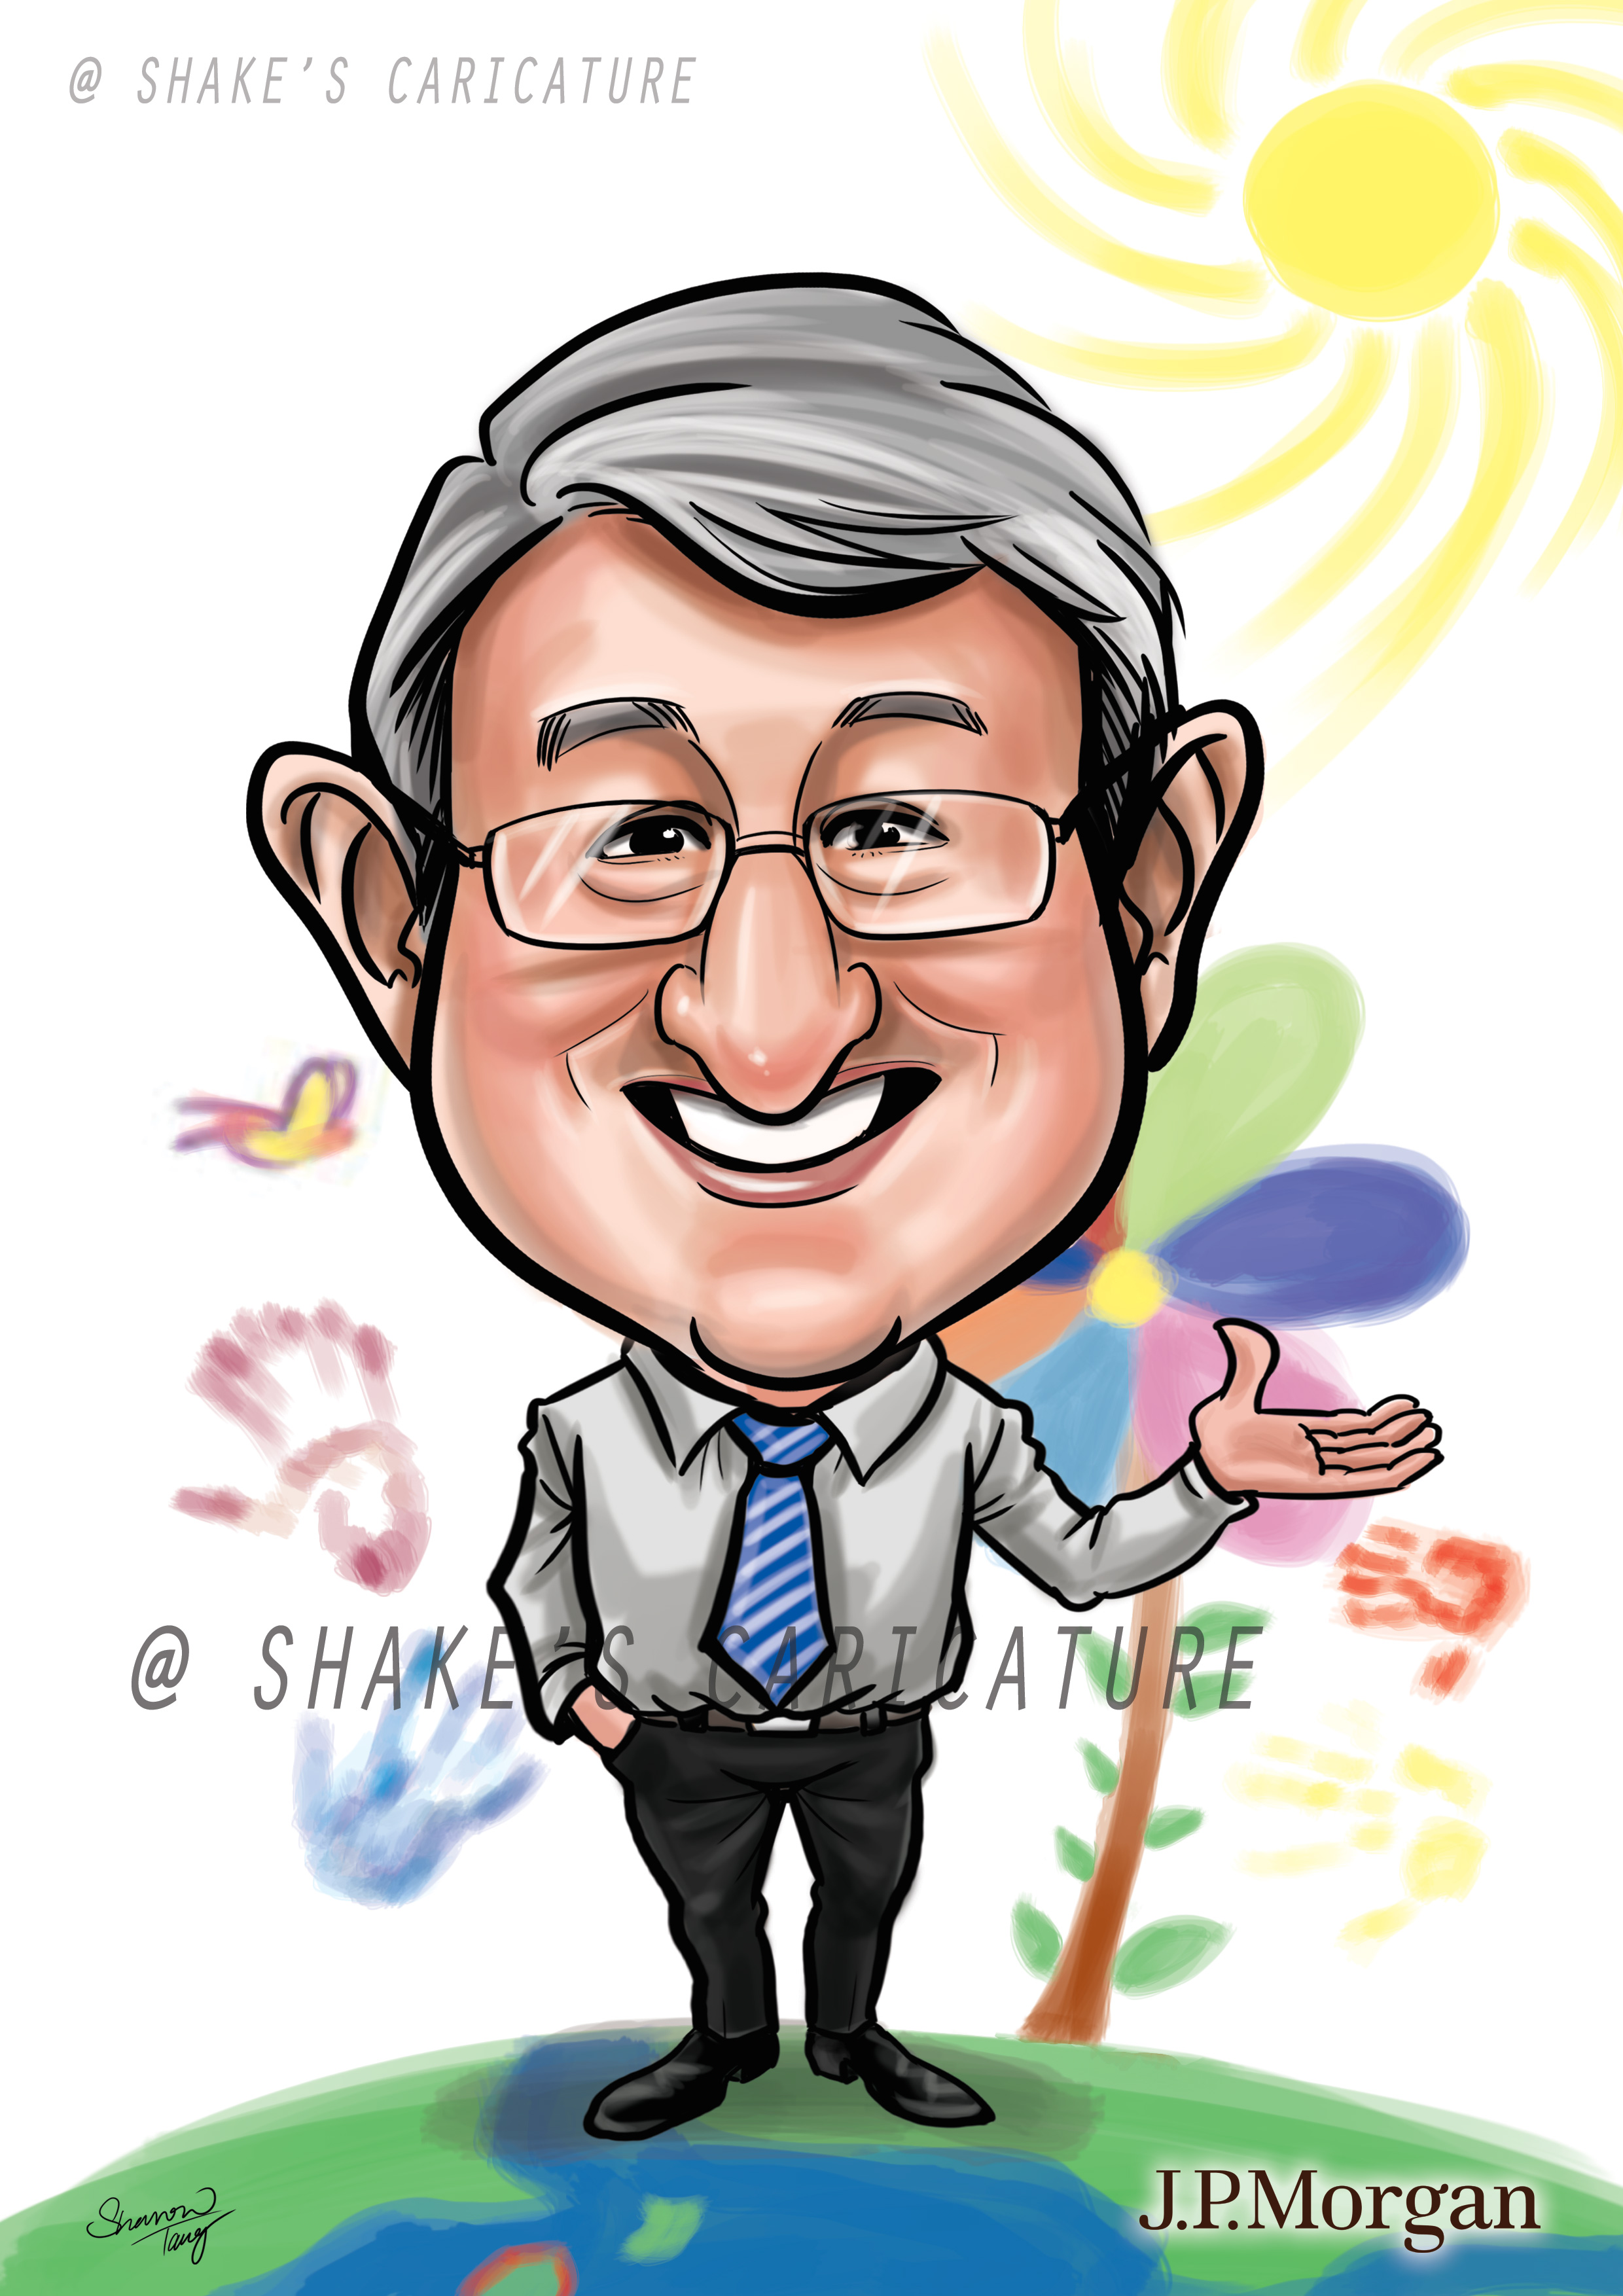 Farewell Caricatures | Shake's Caricature